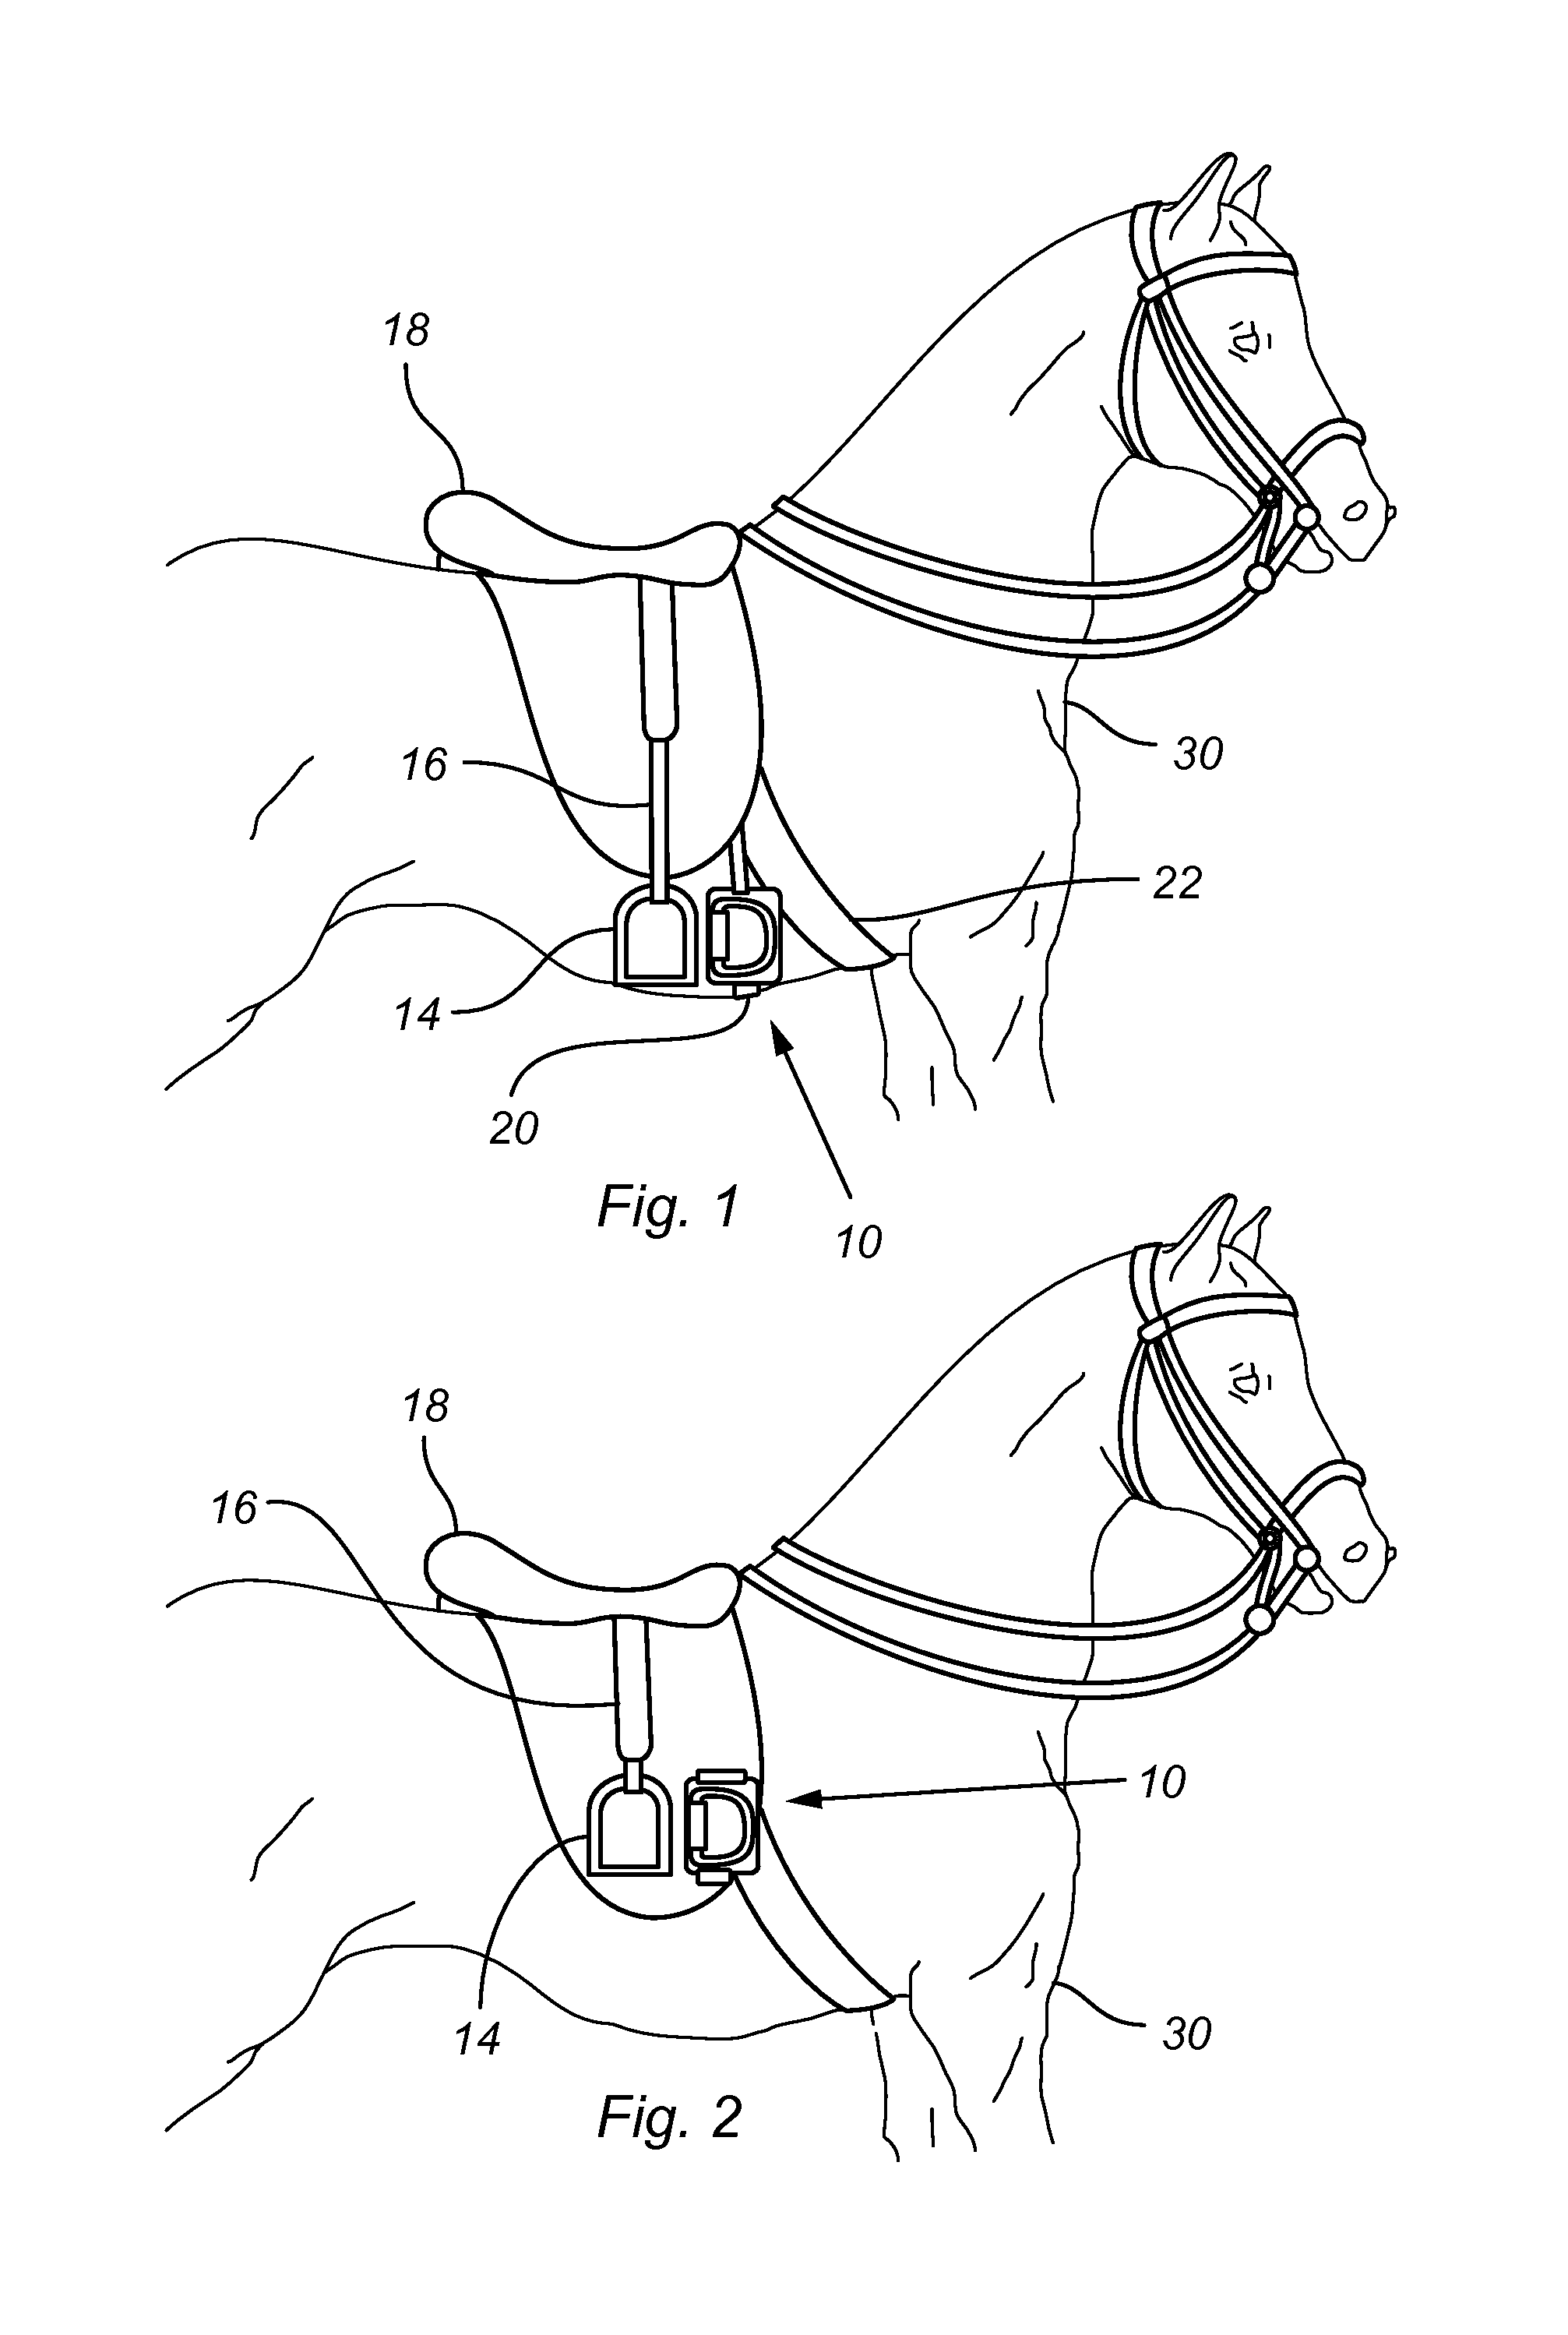 System for Use in Horseback Riding